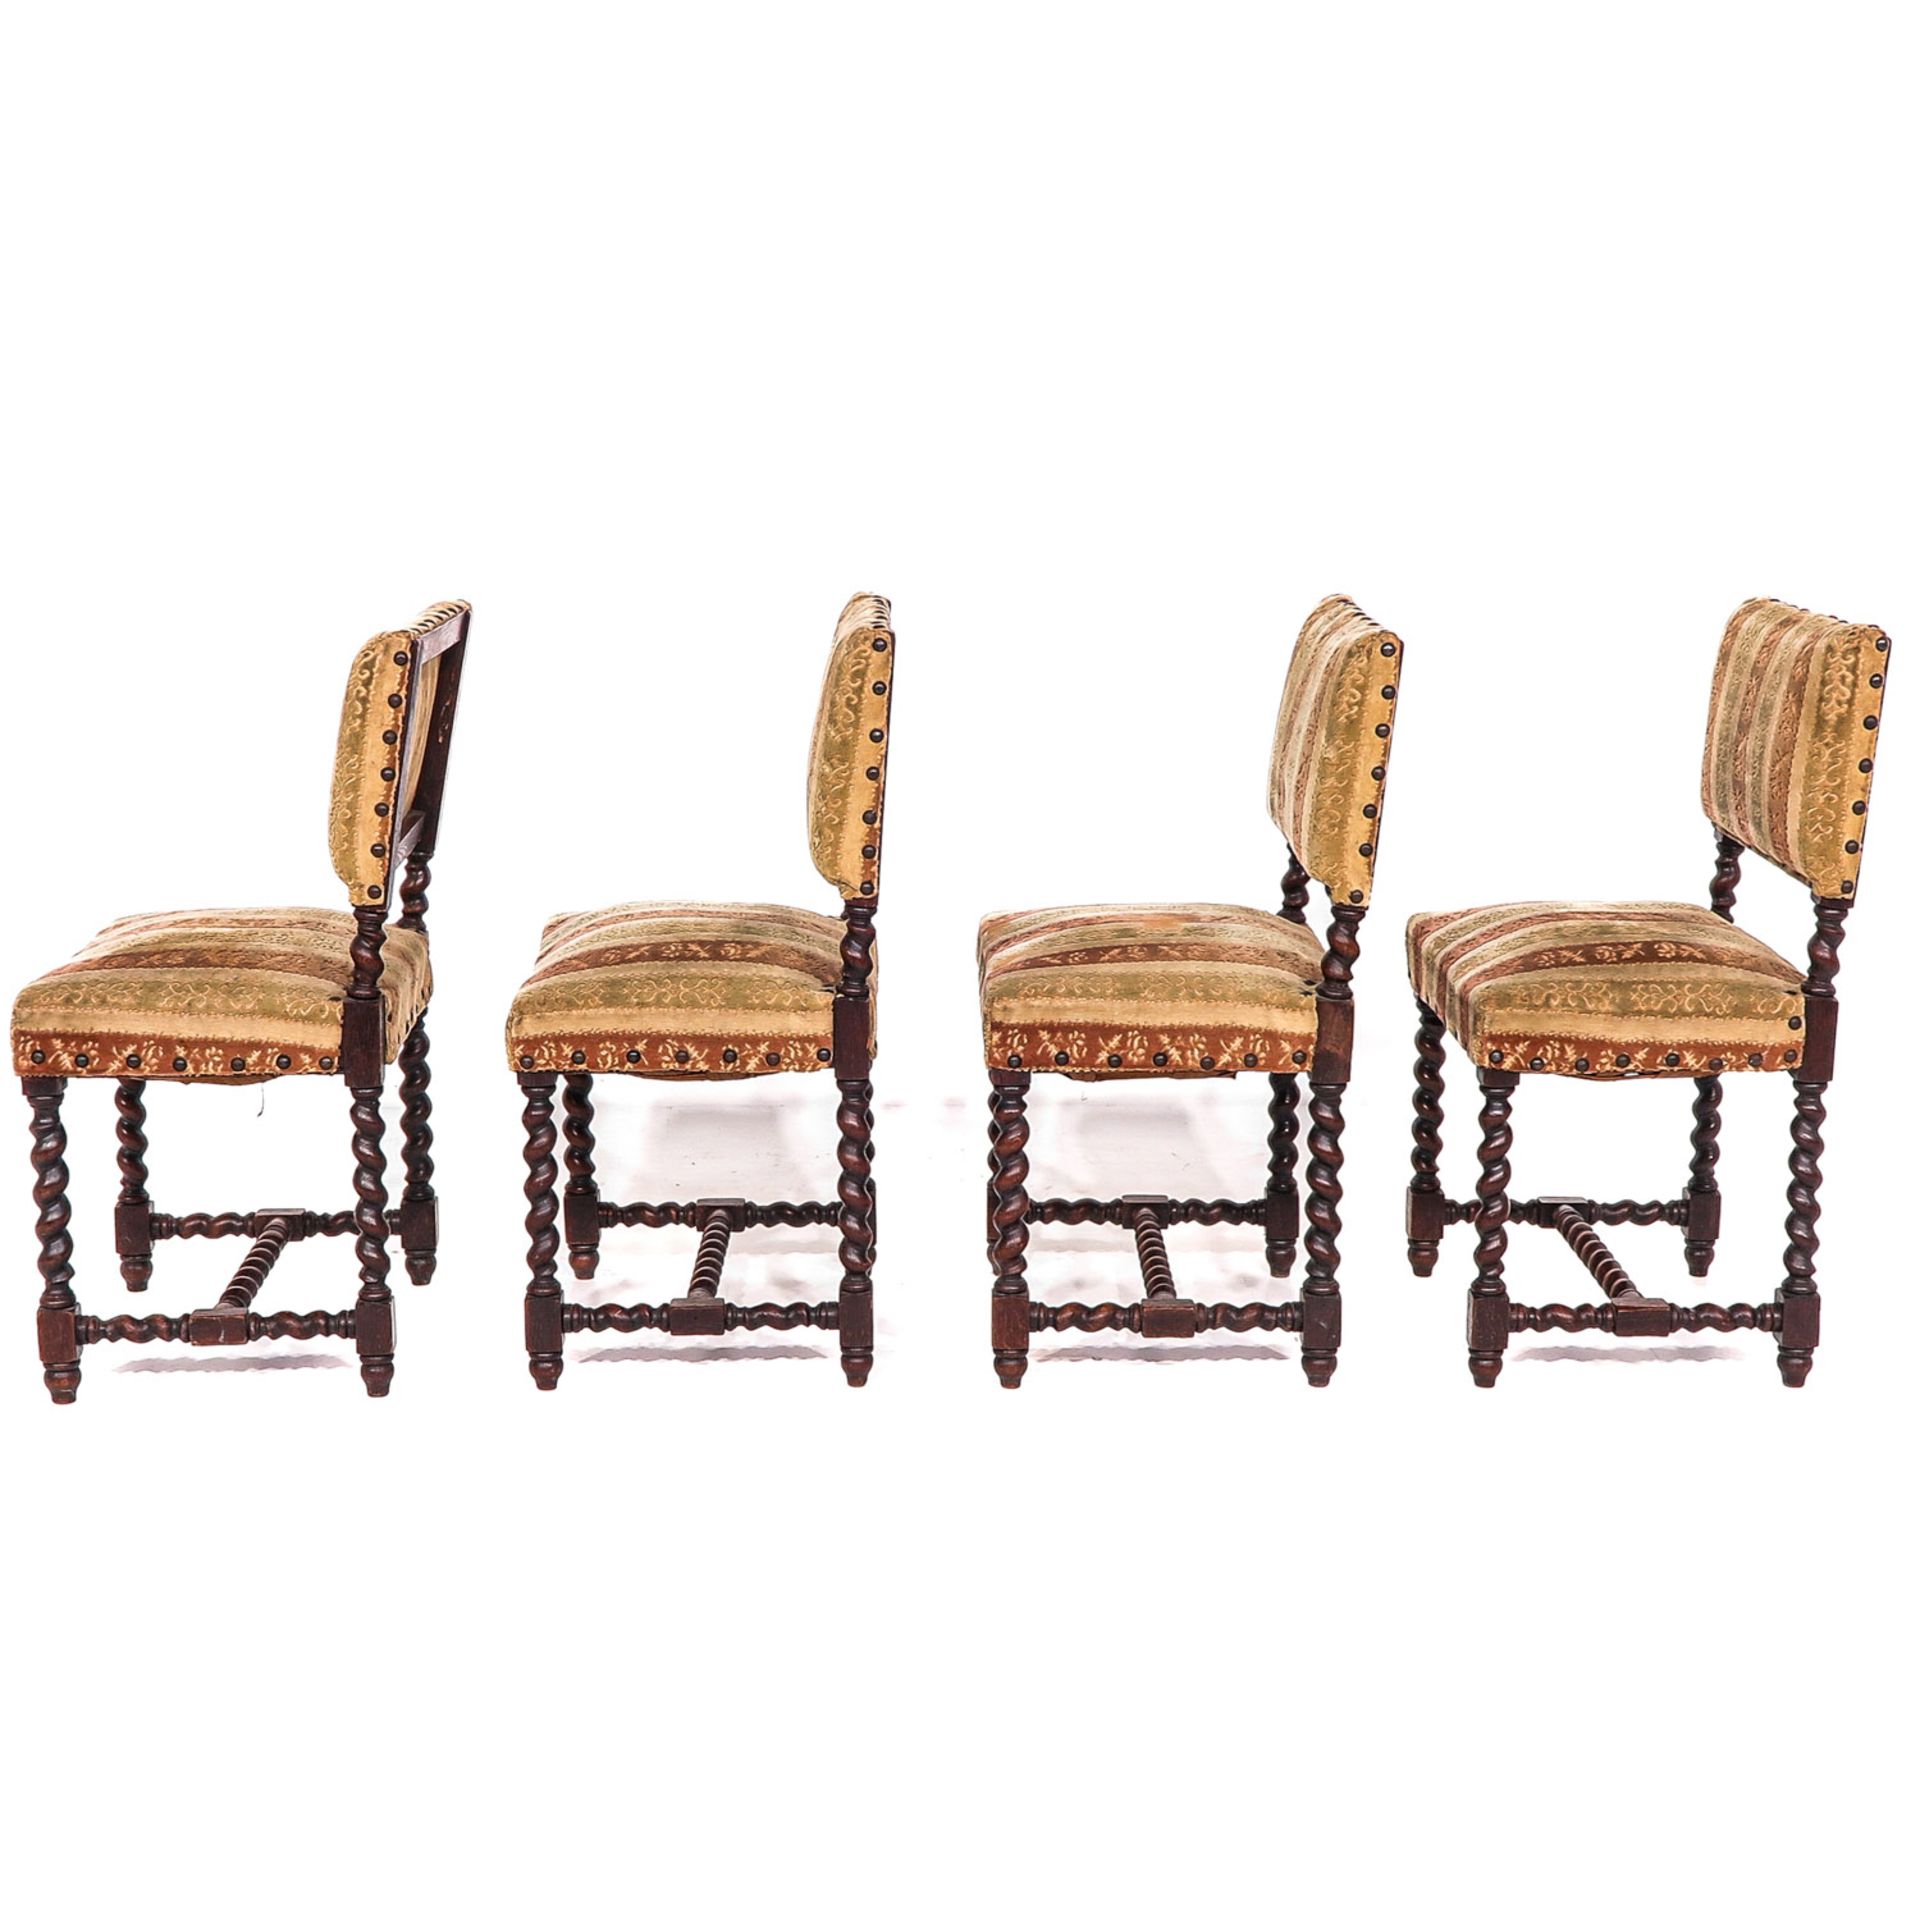 A Collection of 4 19th Century Chairs - Image 2 of 8